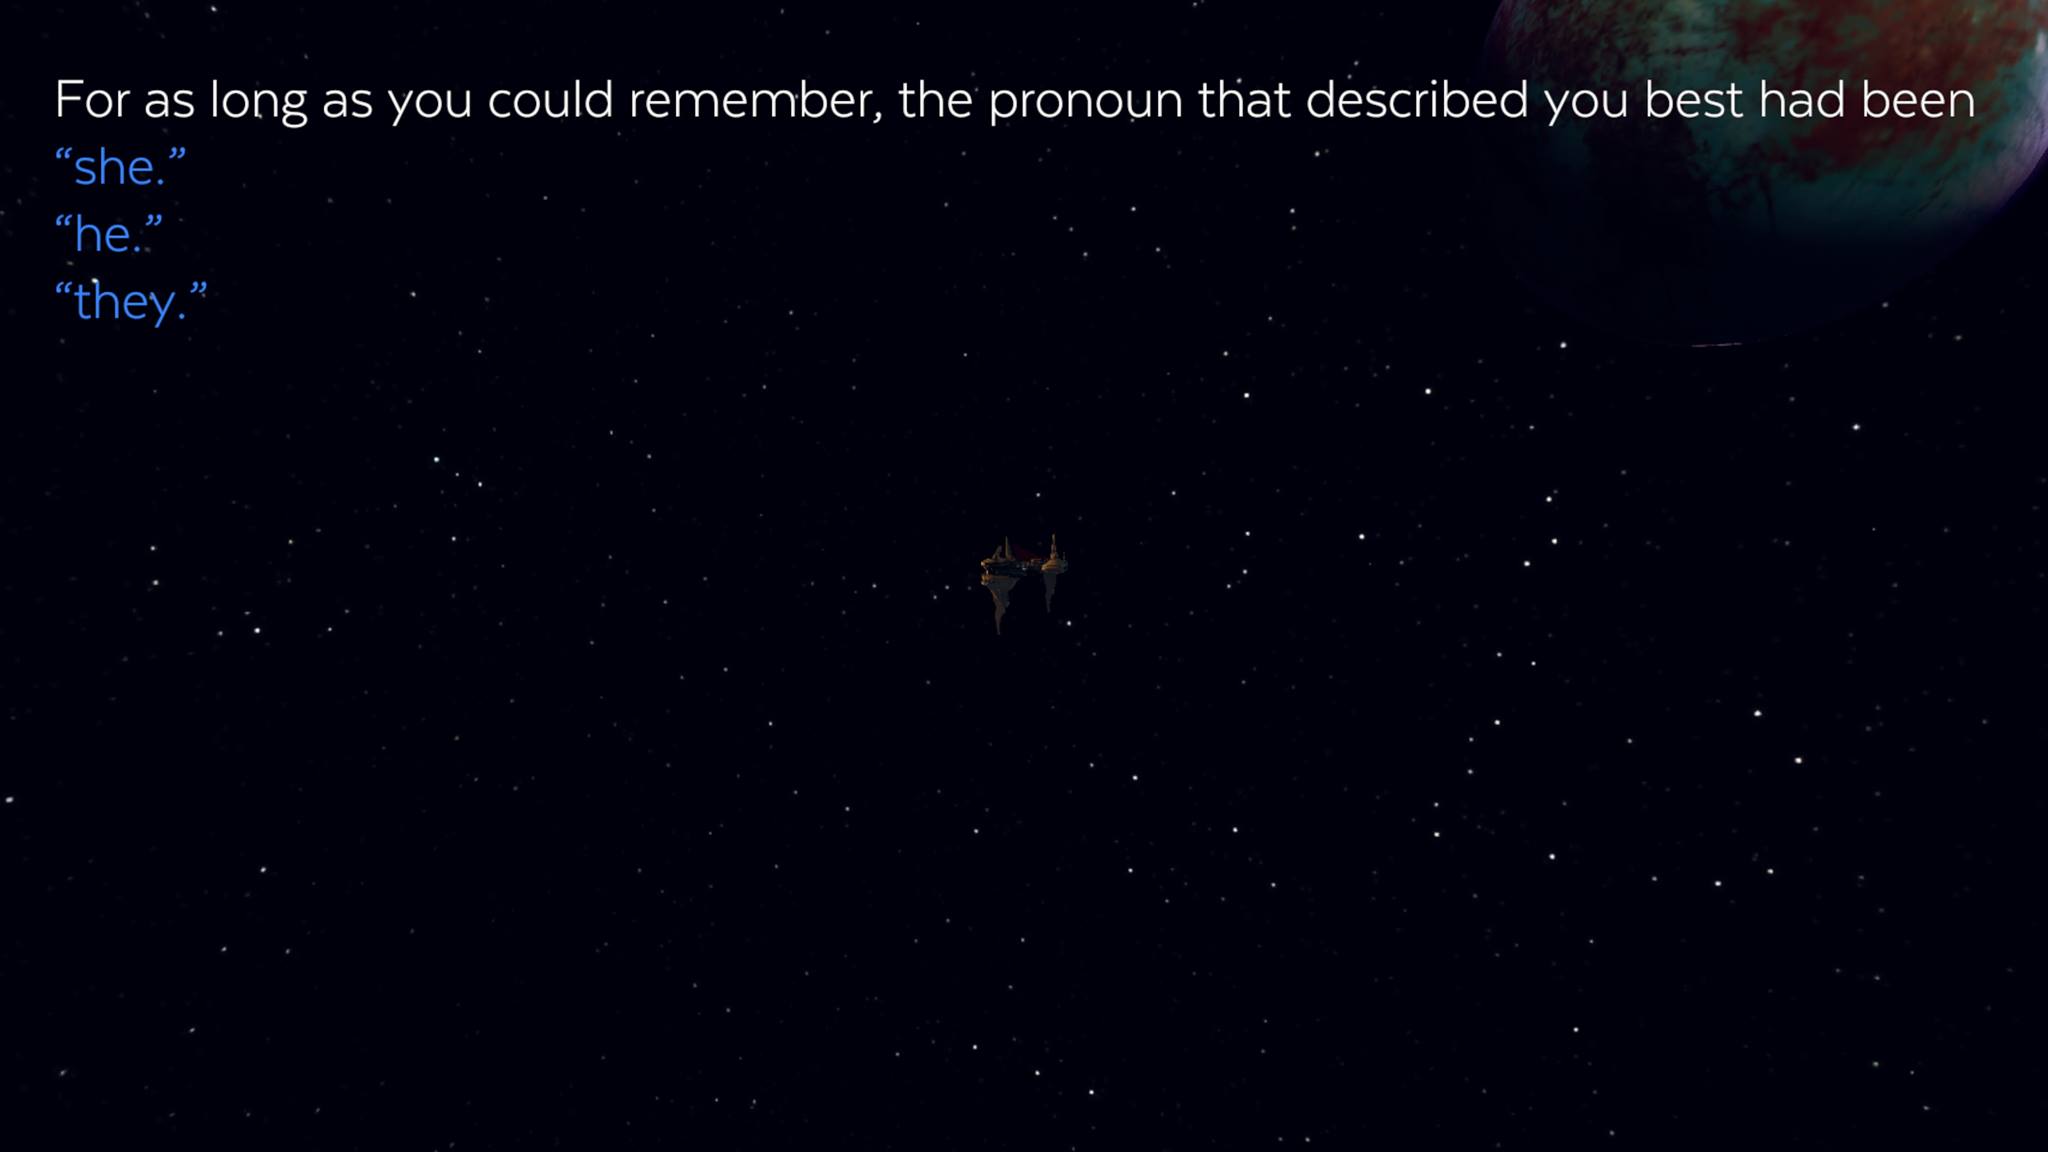 In-game text reads, 'For as long as you could remember, the pronoun that described you best had been' with the options 'she', 'he', and 'they'.